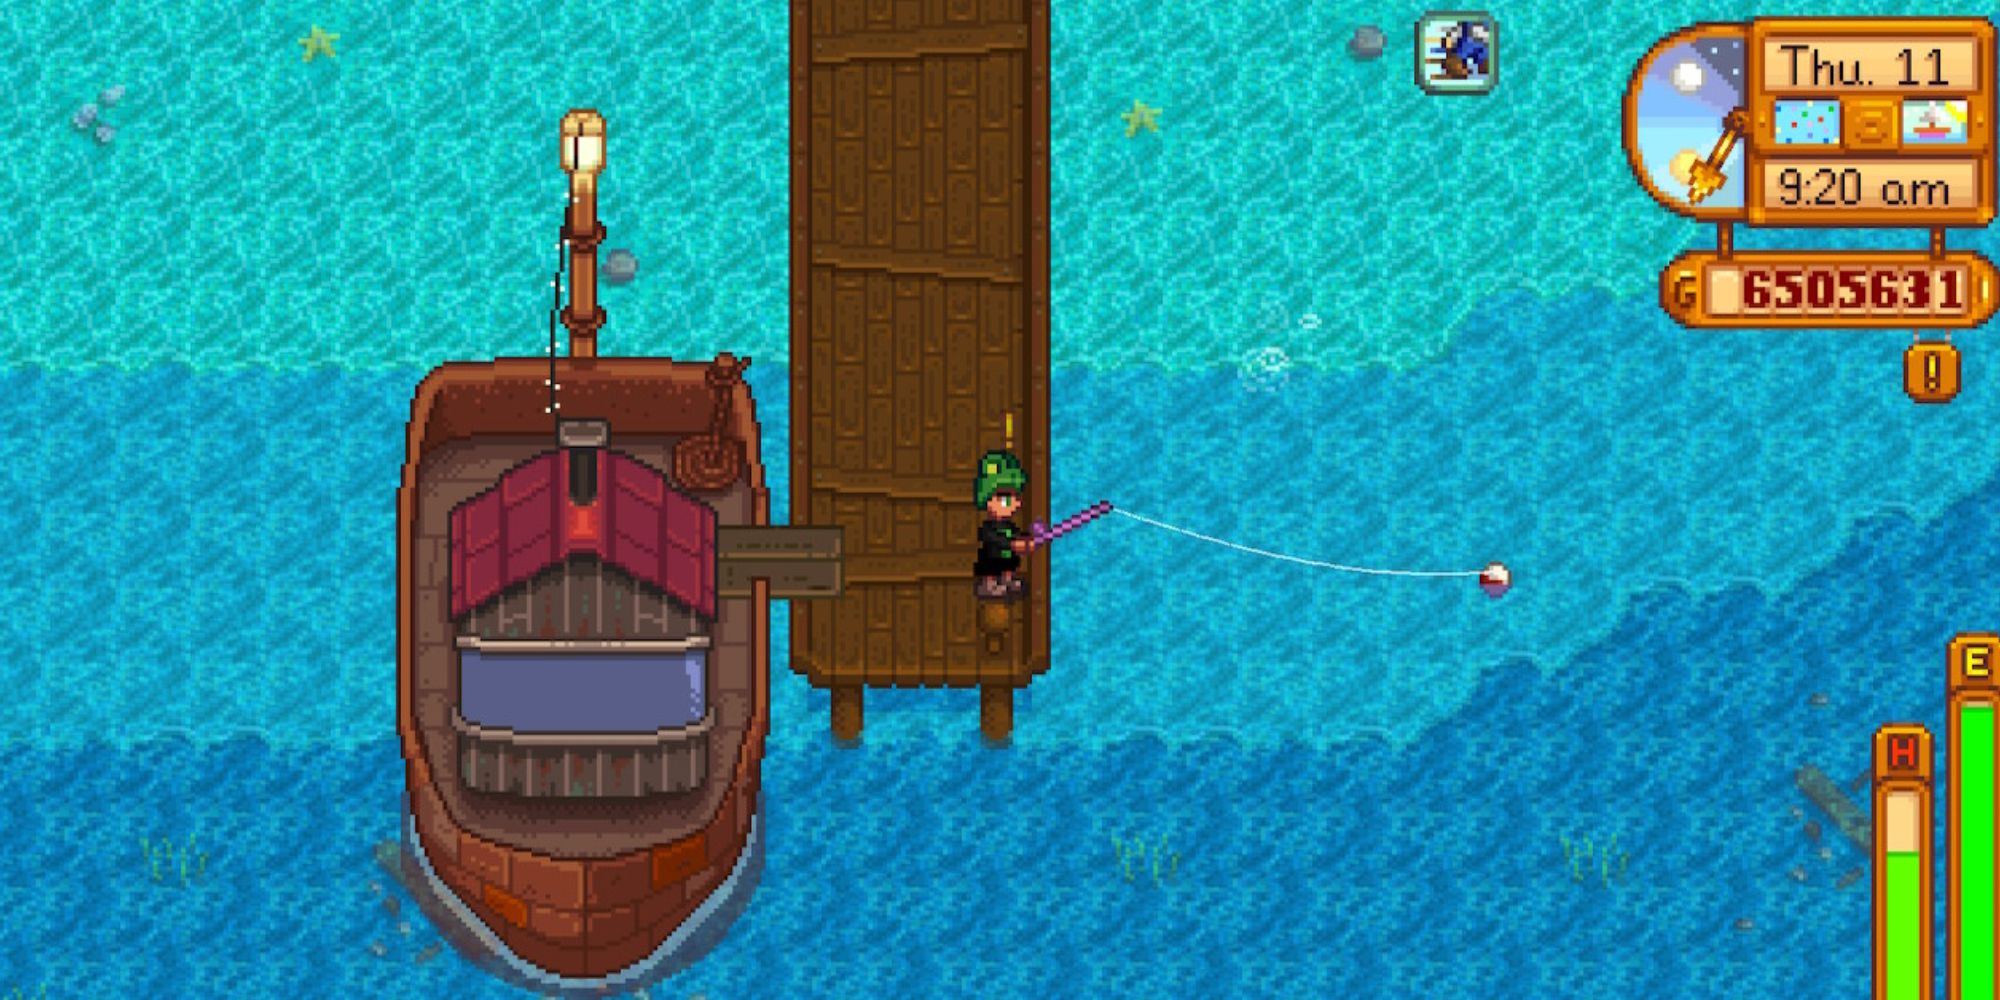 Ginger Island Fishing in Stardew Valley